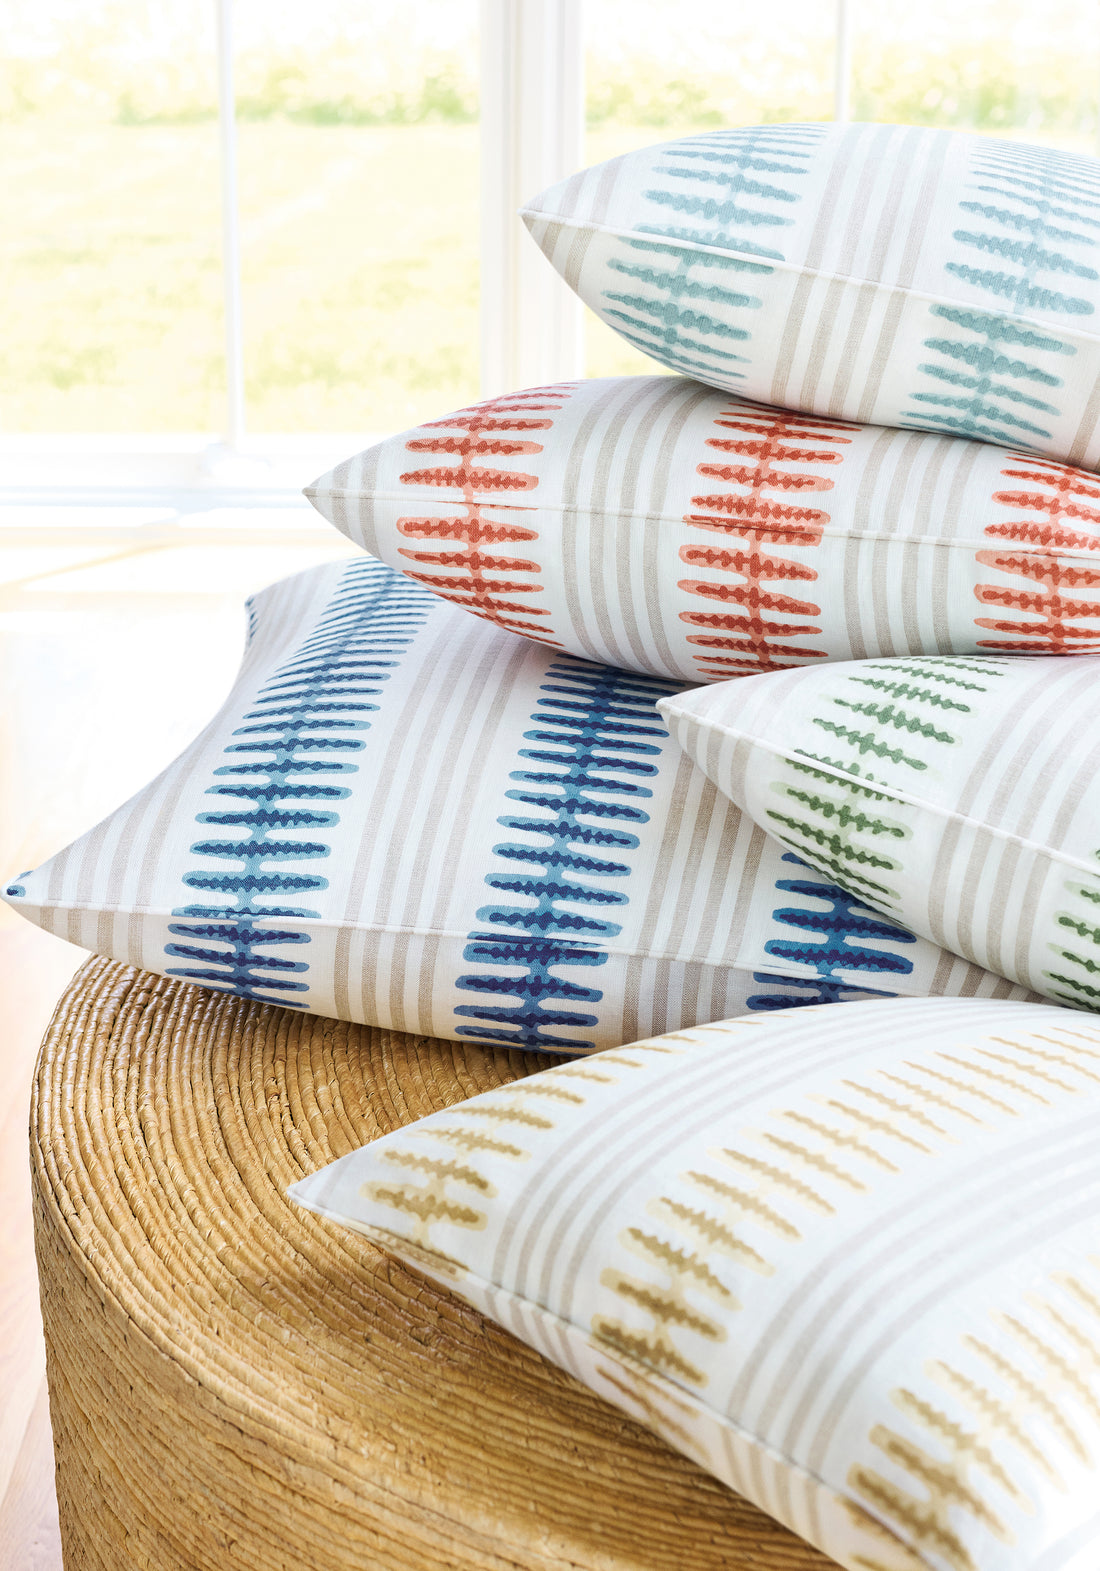 Pillow in Indo Stripe fabric in sunbaked color - pattern number F981319 - by Thibaut in the Montecito collection